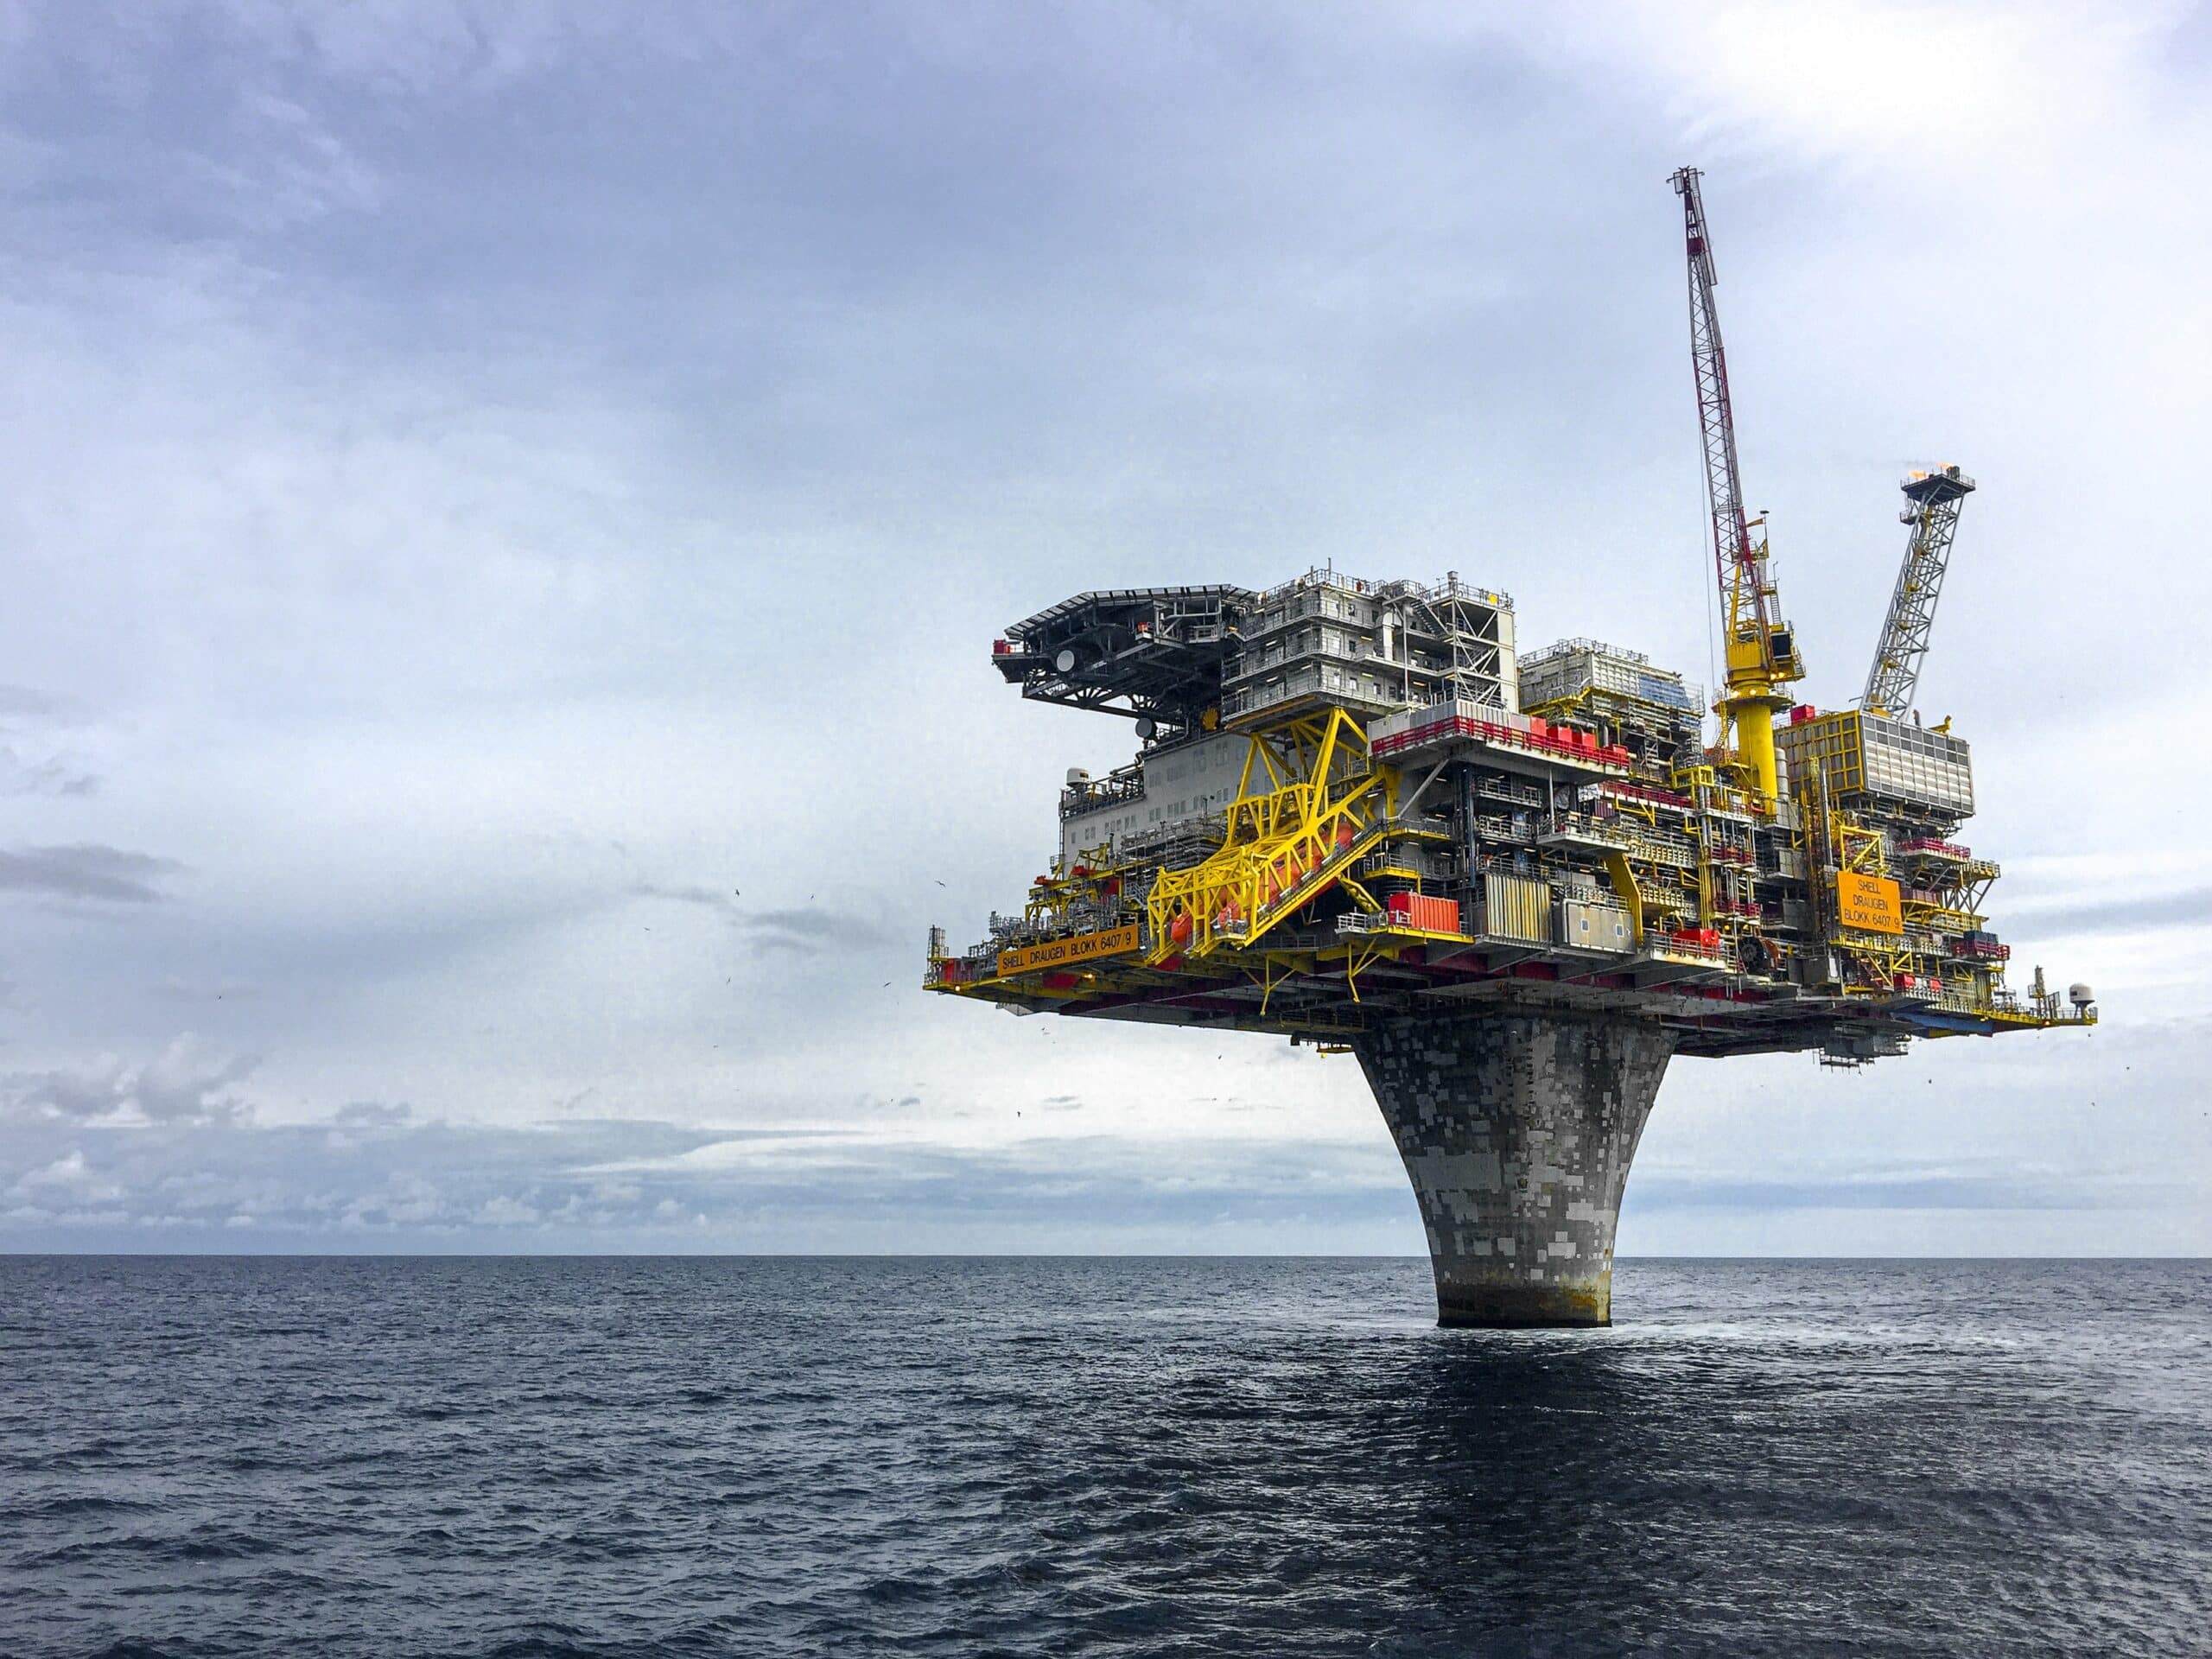 View of an Oil Platform in the Sea